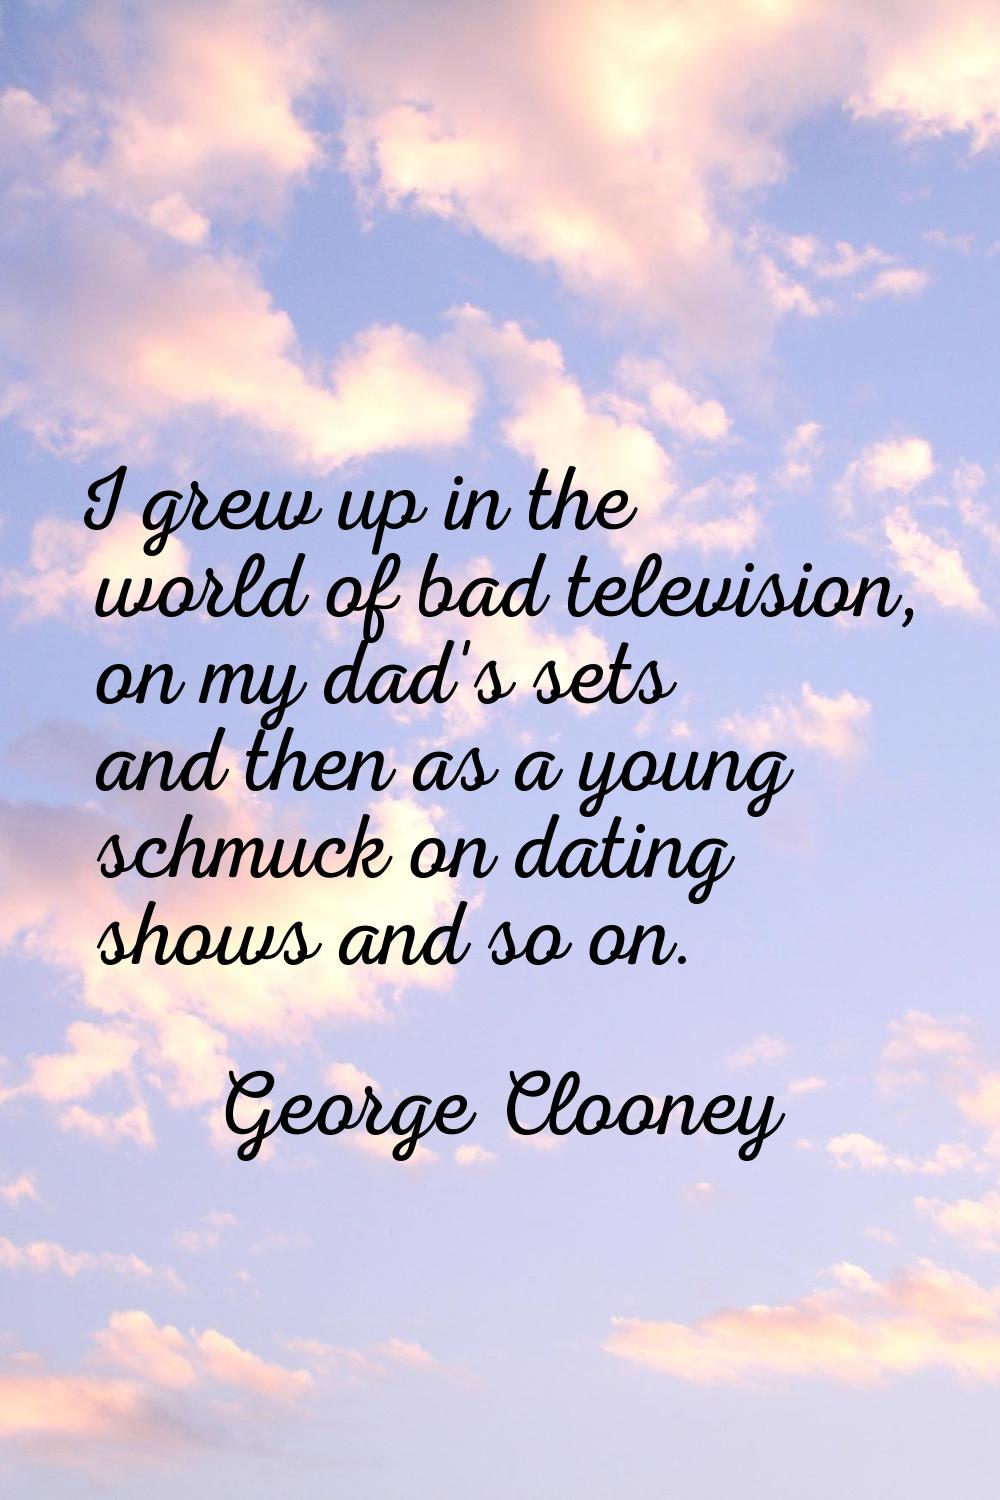 I grew up in the world of bad television, on my dad's sets and then as a young schmuck on dating sh